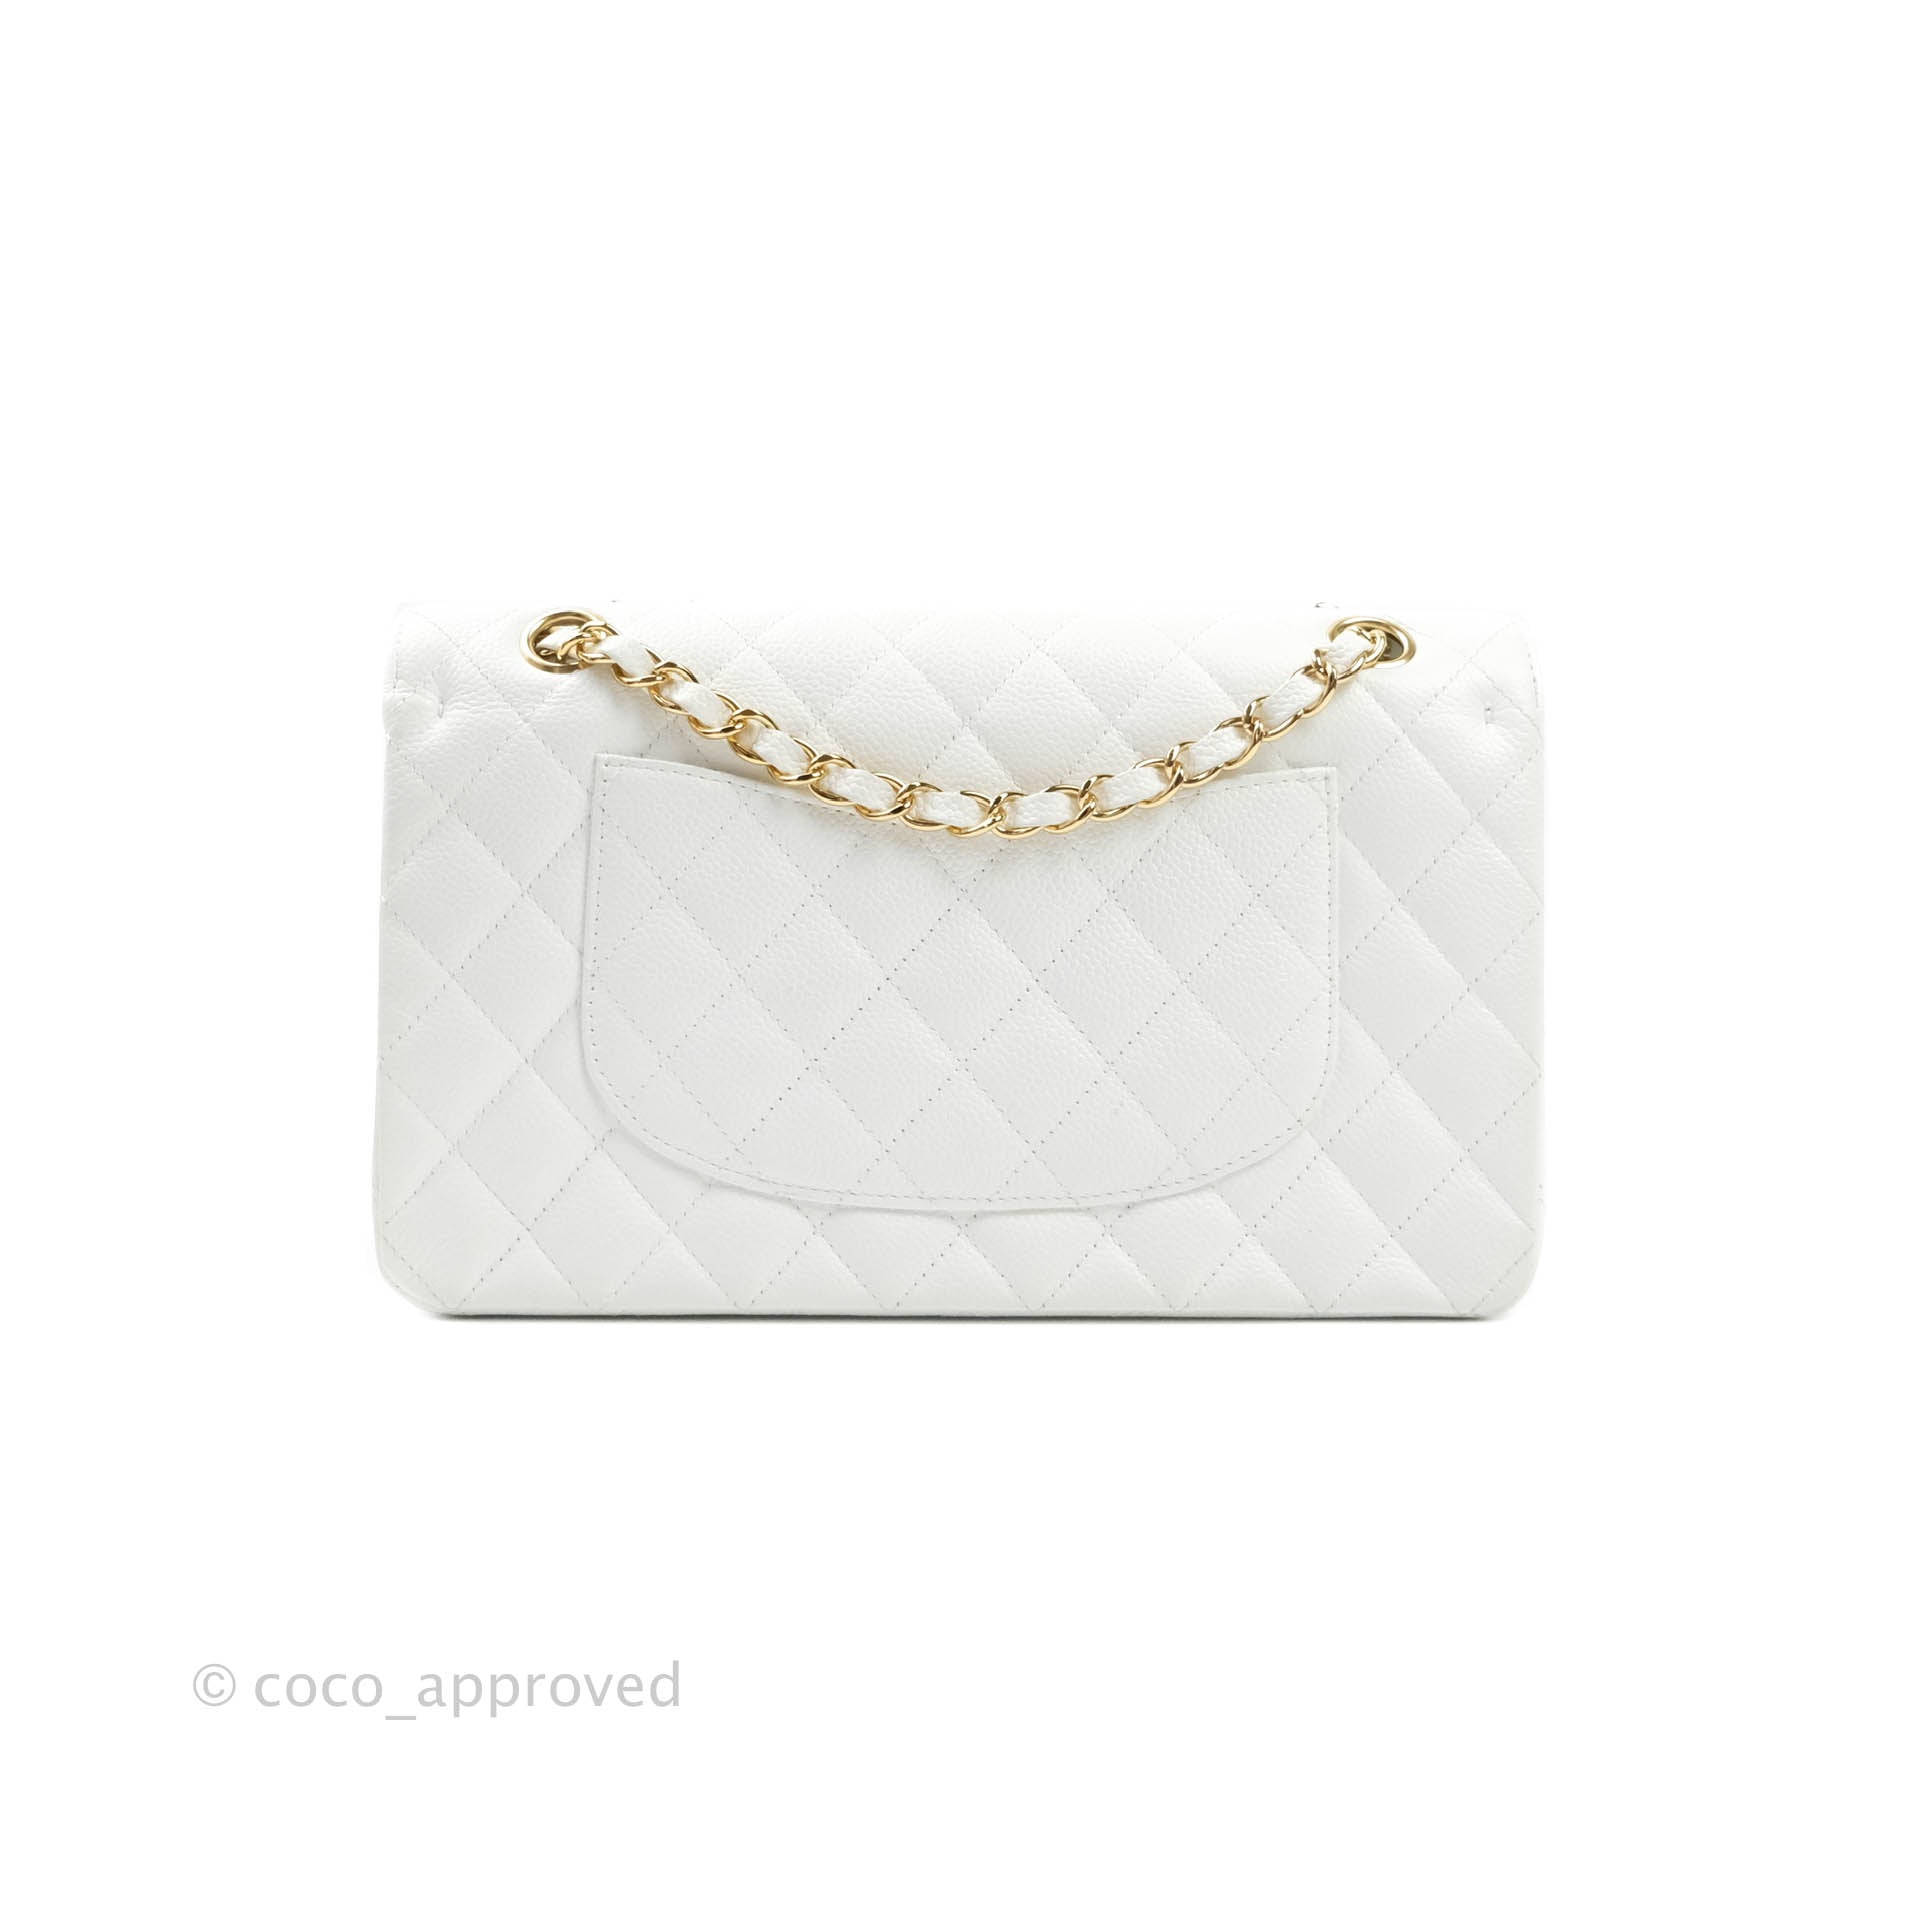 FWRD Renew Chanel Medium Quilted Classic Double Flap Shoulder Bag in Beige